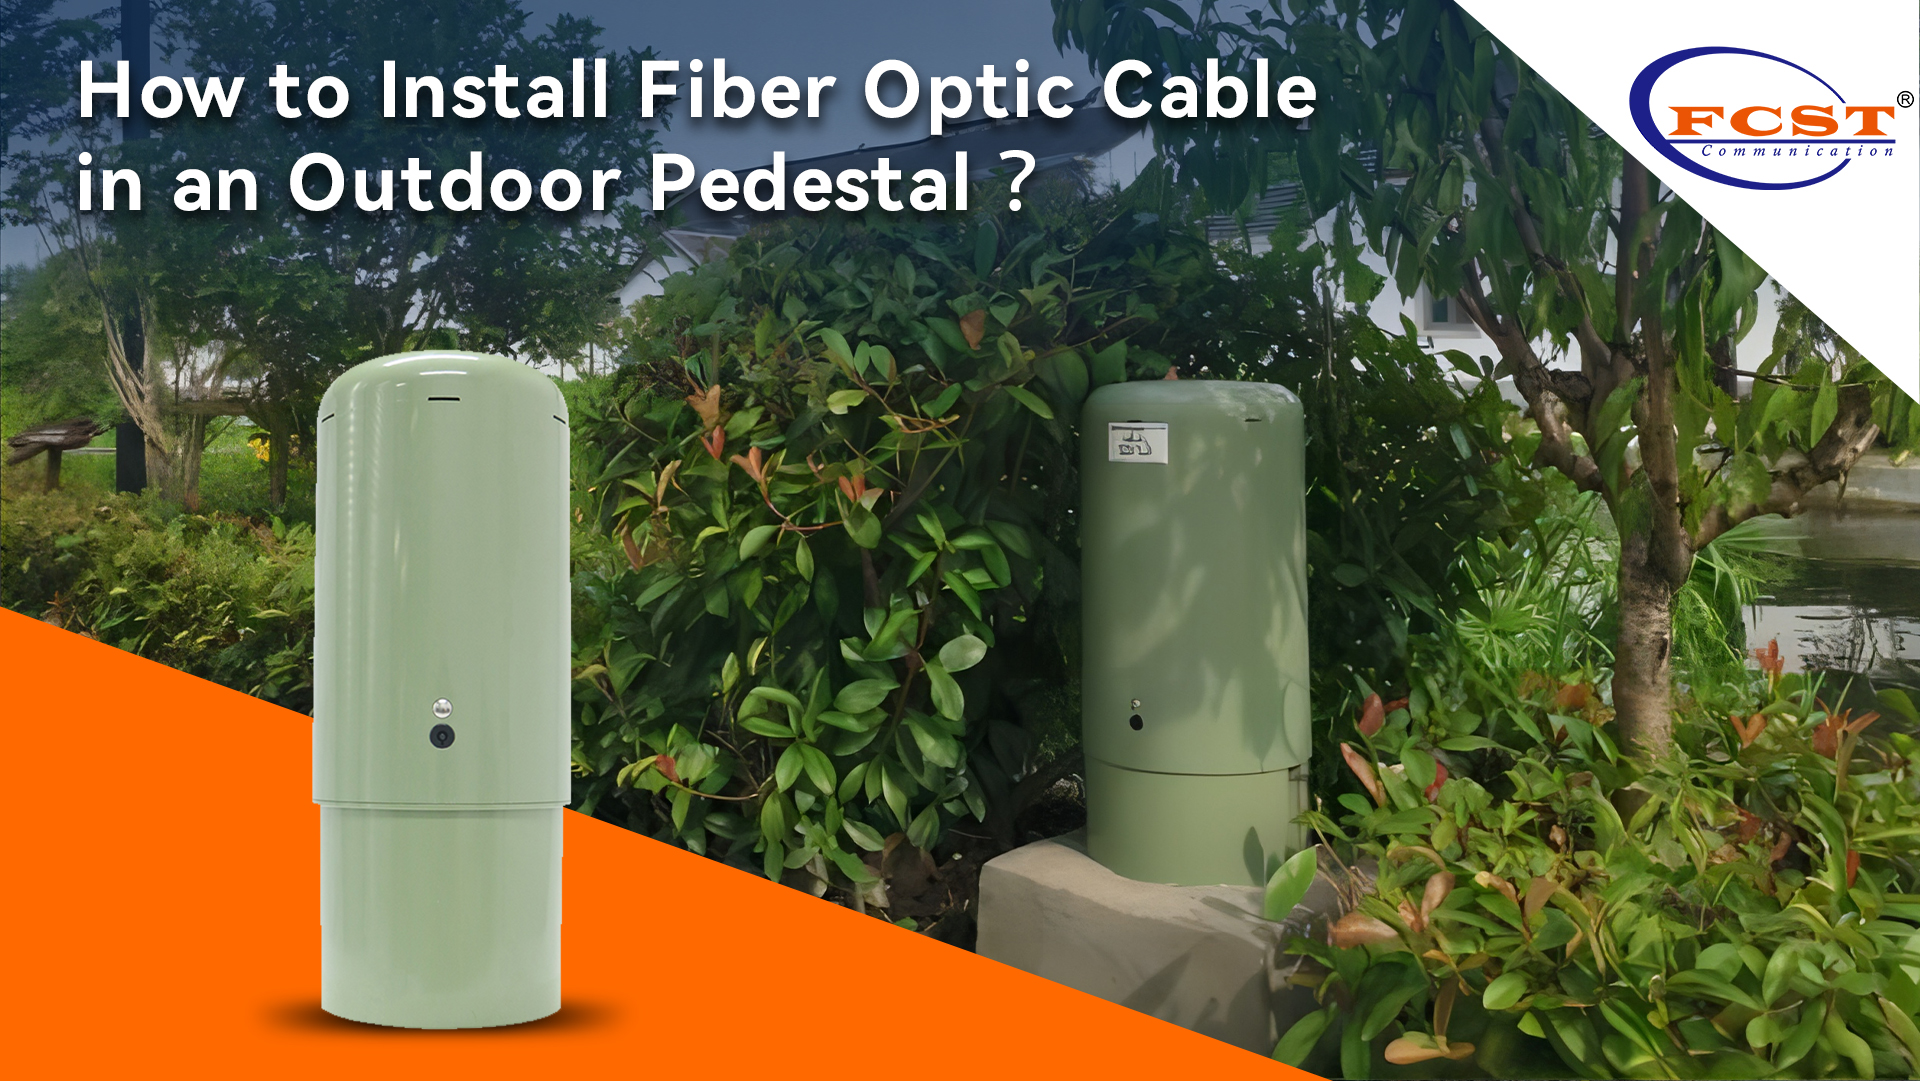 How to Install Fiber Optic Cable in an Outdoor Pedestal